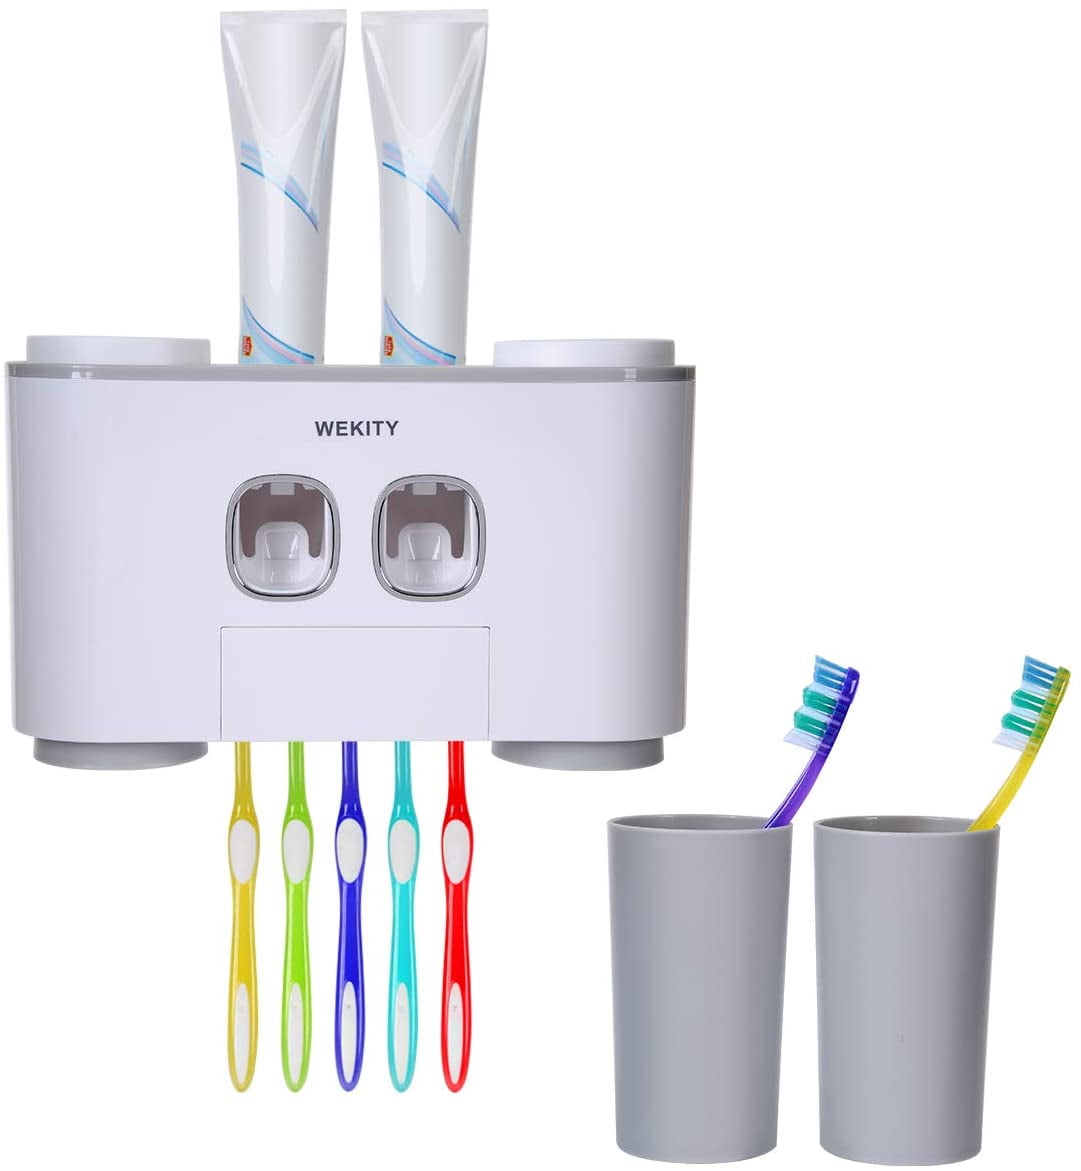 2 Automatic Toothpaste Dispenser and 4 Cups 5 Toothbrush Slots Toothbrush Holder Multifunctional Wall-Mounted Space-Saving Toothbrush and Toothpaste Squeezer Kit with Dustproof Cover Blue